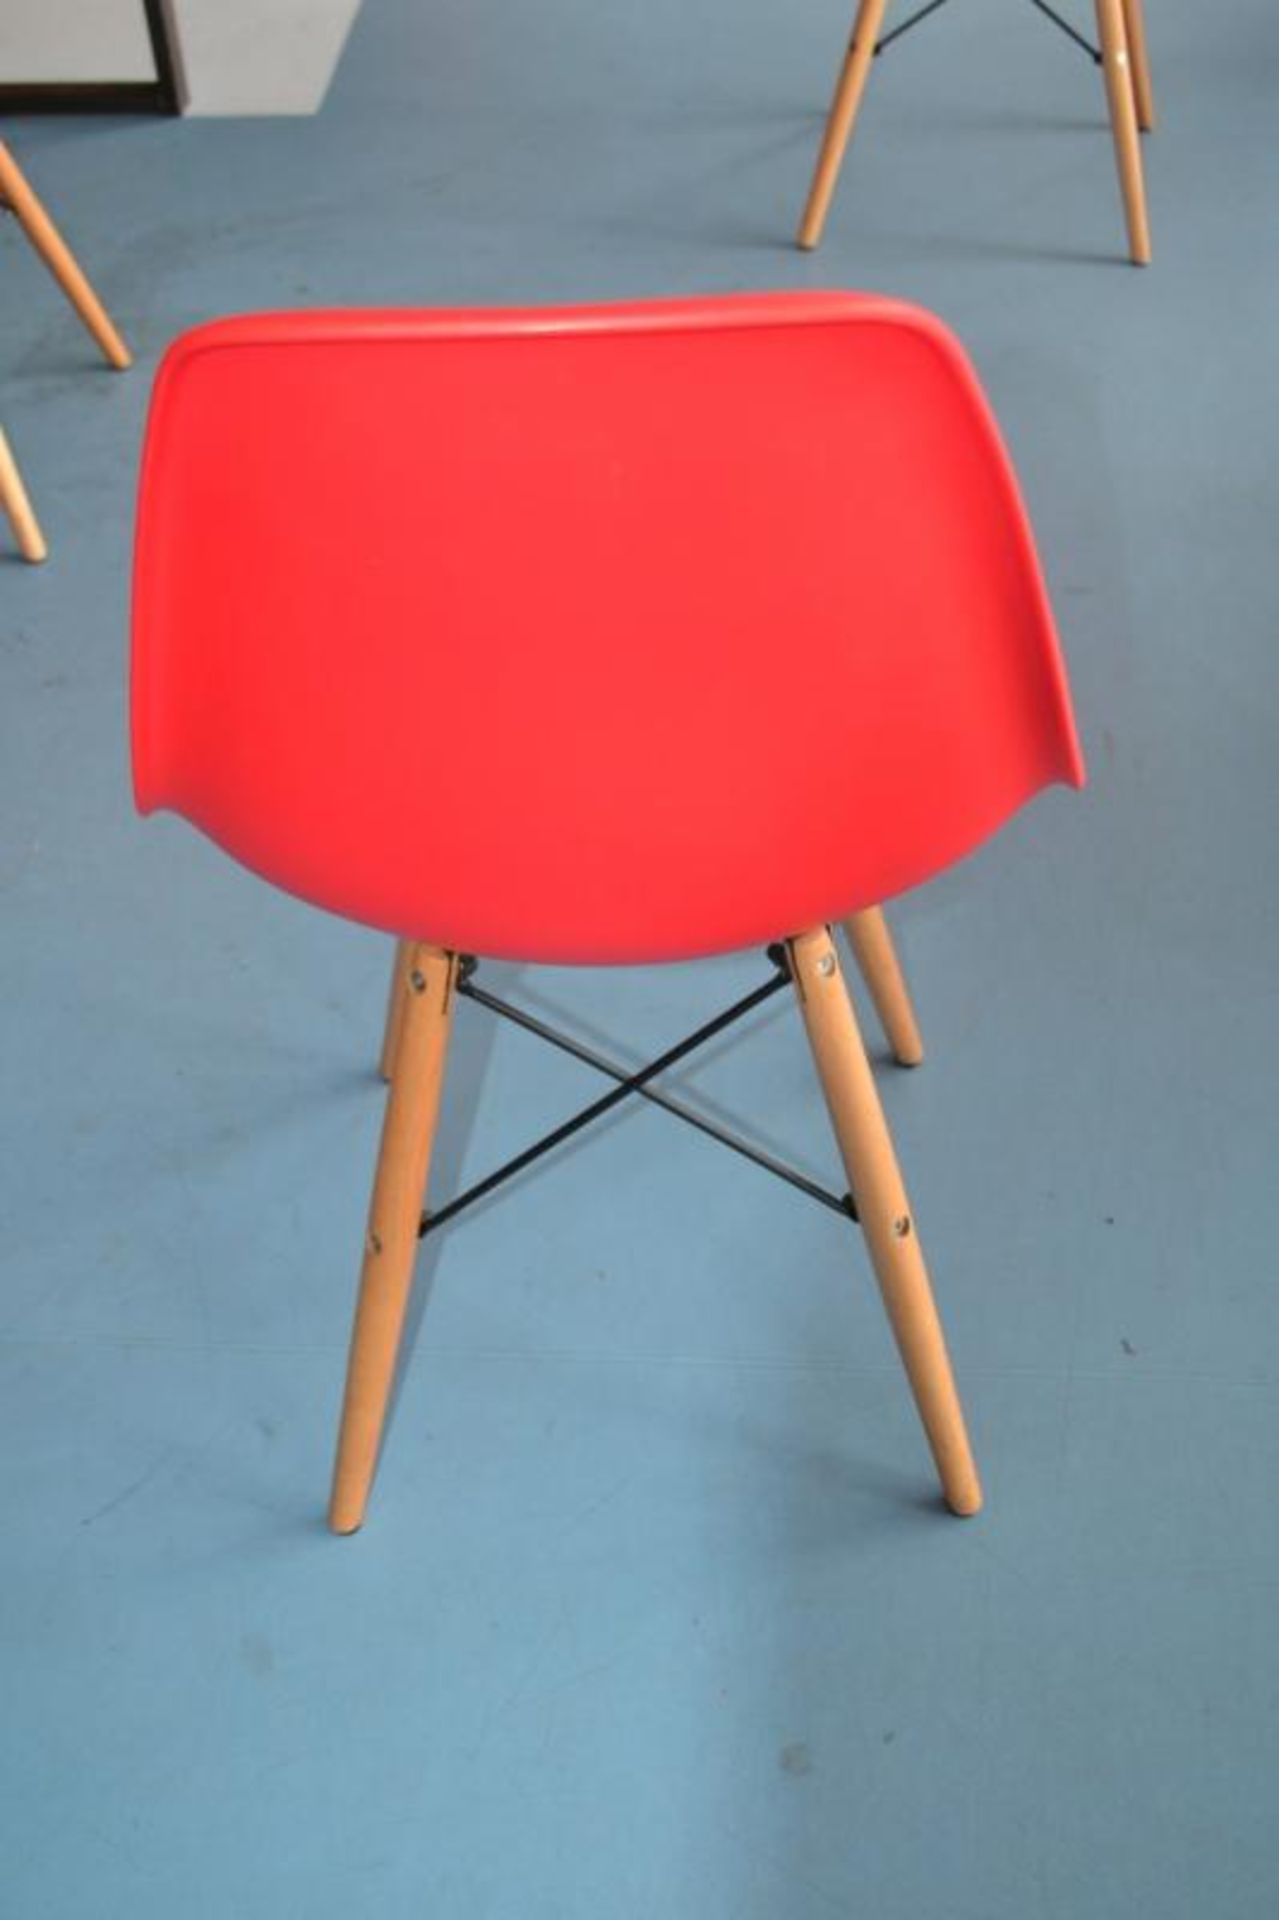 12 x Children's Orange and Red Charles and Ray Eames Style Shell Chairs - CL425 - Location: Altrinch - Image 3 of 8